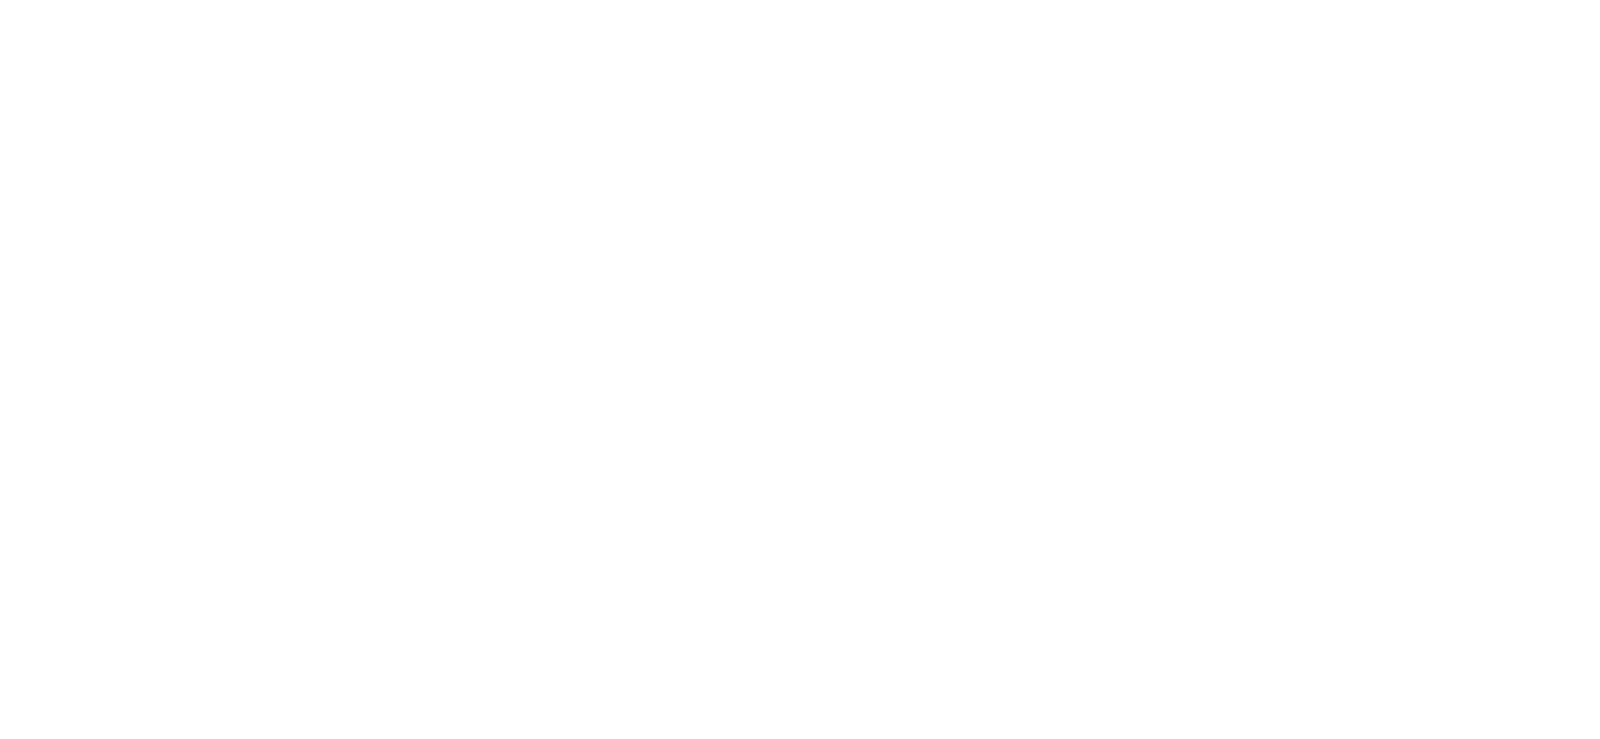 Winter Camps